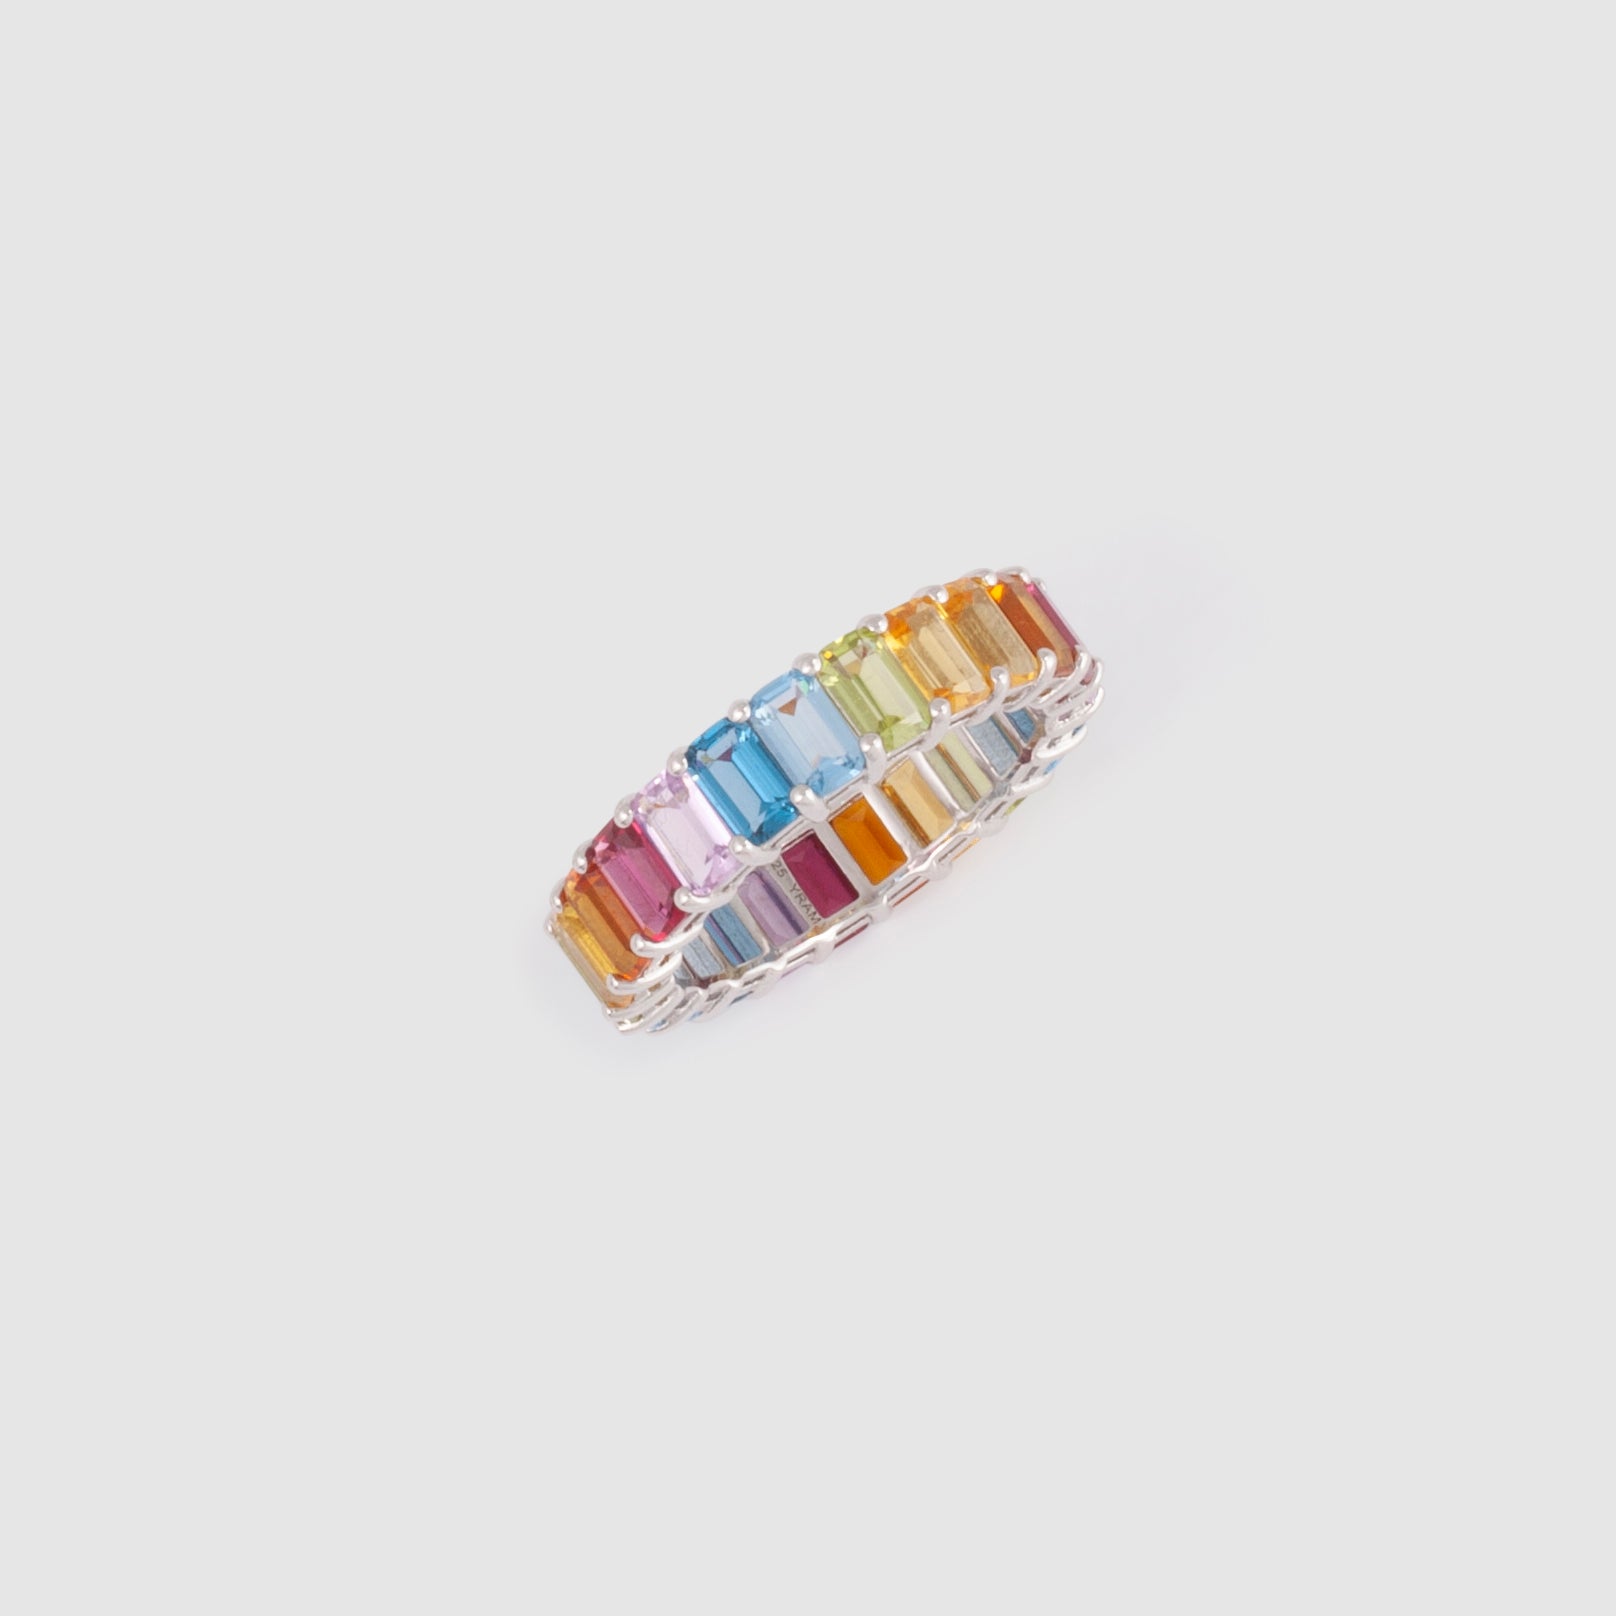 Ring featuring rainbow-coloured baguette stones set in a simple band